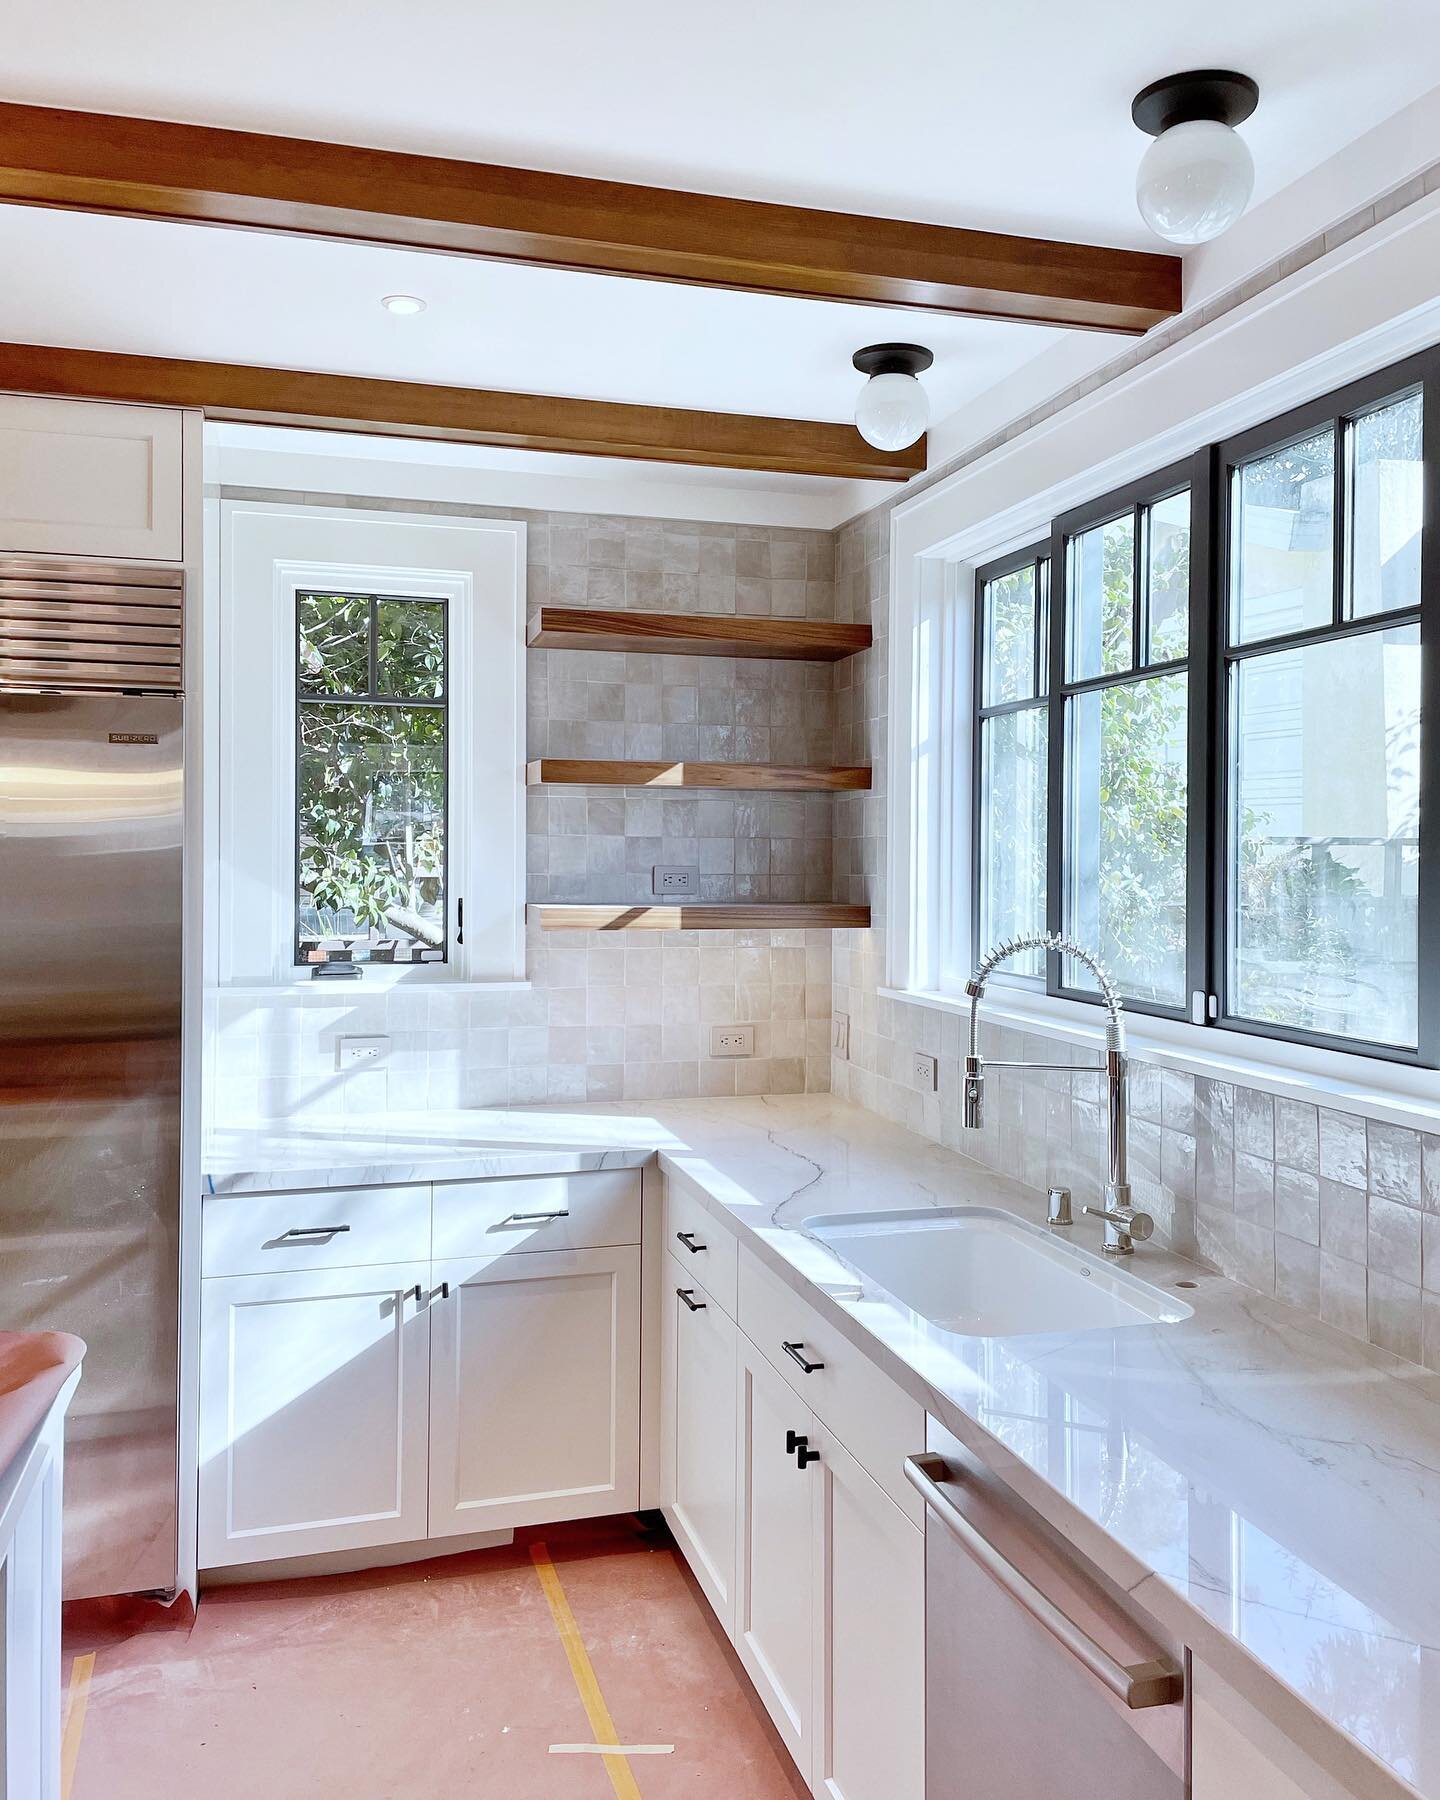 In love with every single detail of the kitchen in our recent Rockridge Craftsman remodel: the handcrafted Moroccan zellige tile, the natural quartzite counters, the gleaming nickel culinary faucet, the rich wood box beams, and the custom divided lit